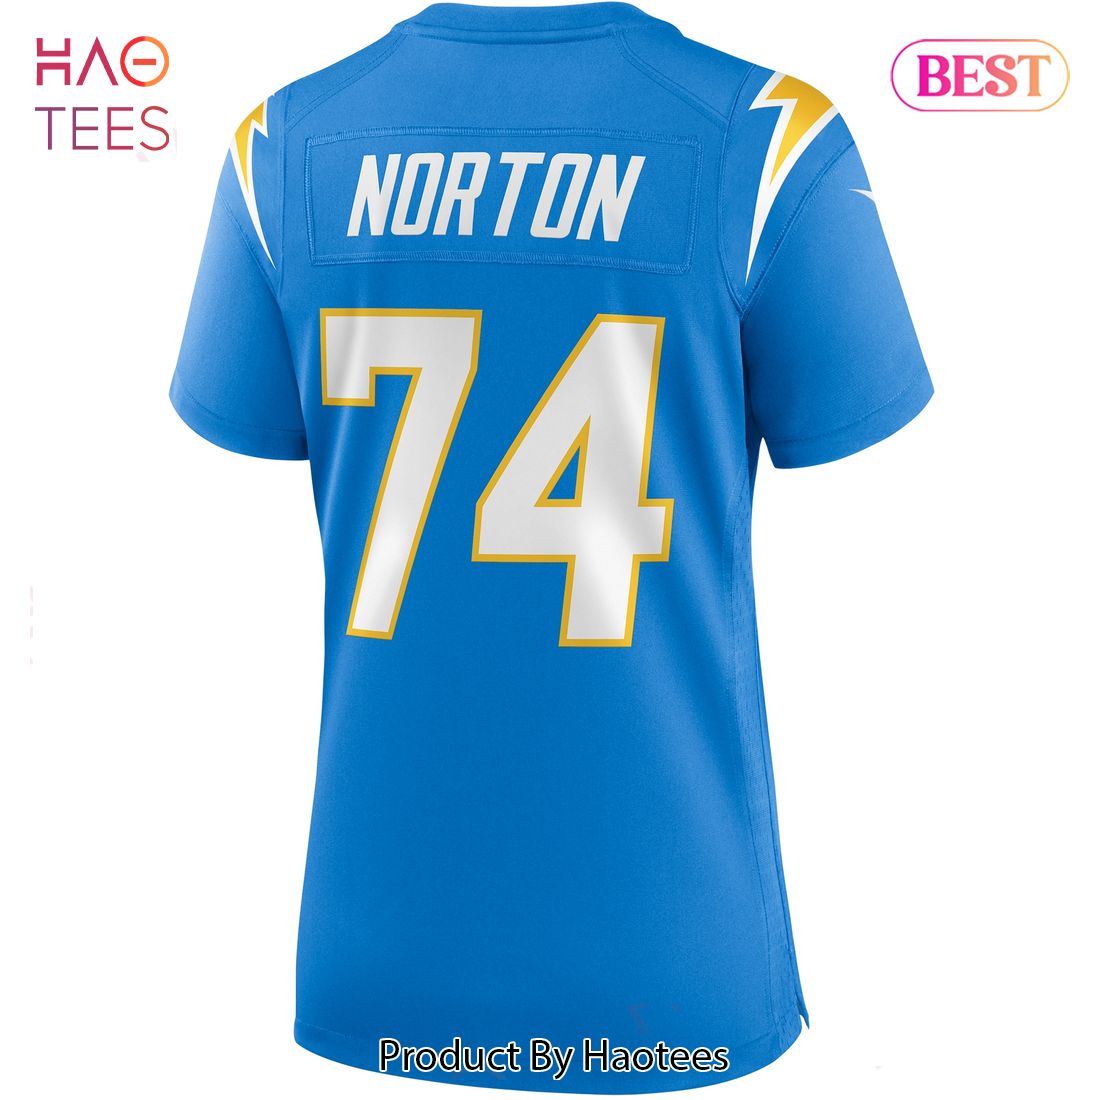 Storm Norton Los Angeles Chargers Nike Women's Game Jersey Powder Blue